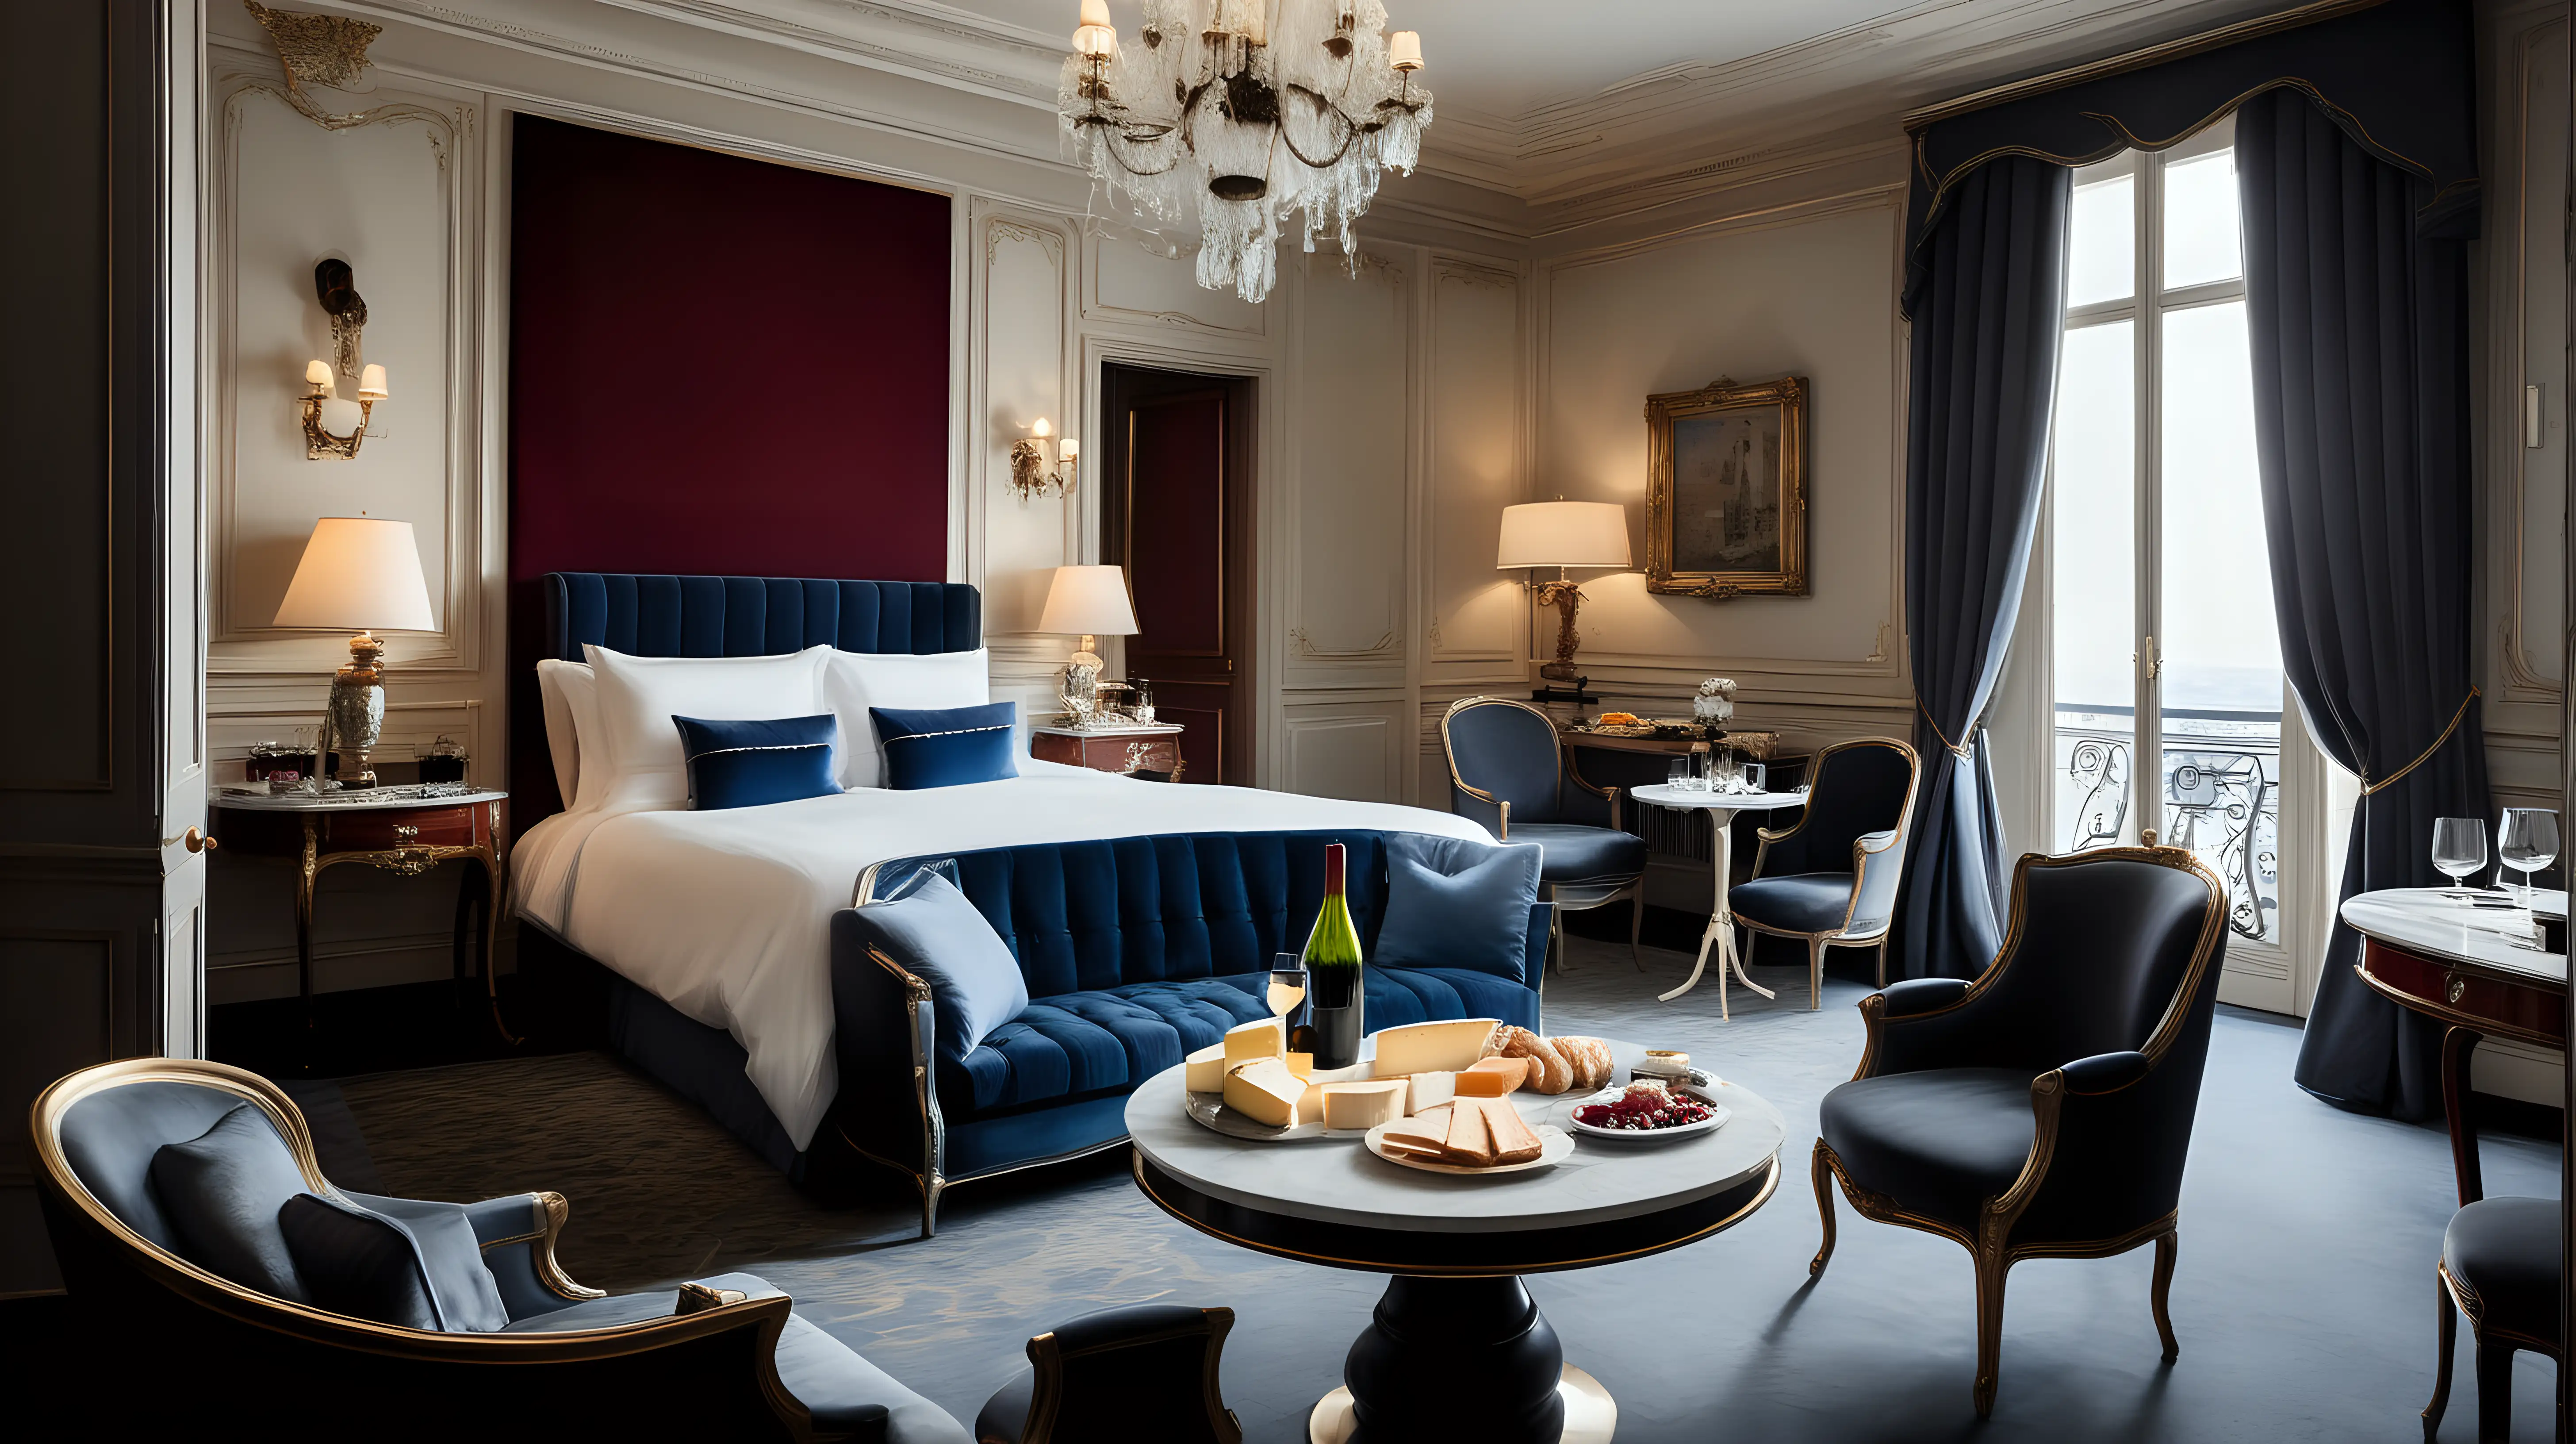 Luxurious FrenchInspired Hotel Room with Opulent Dcor